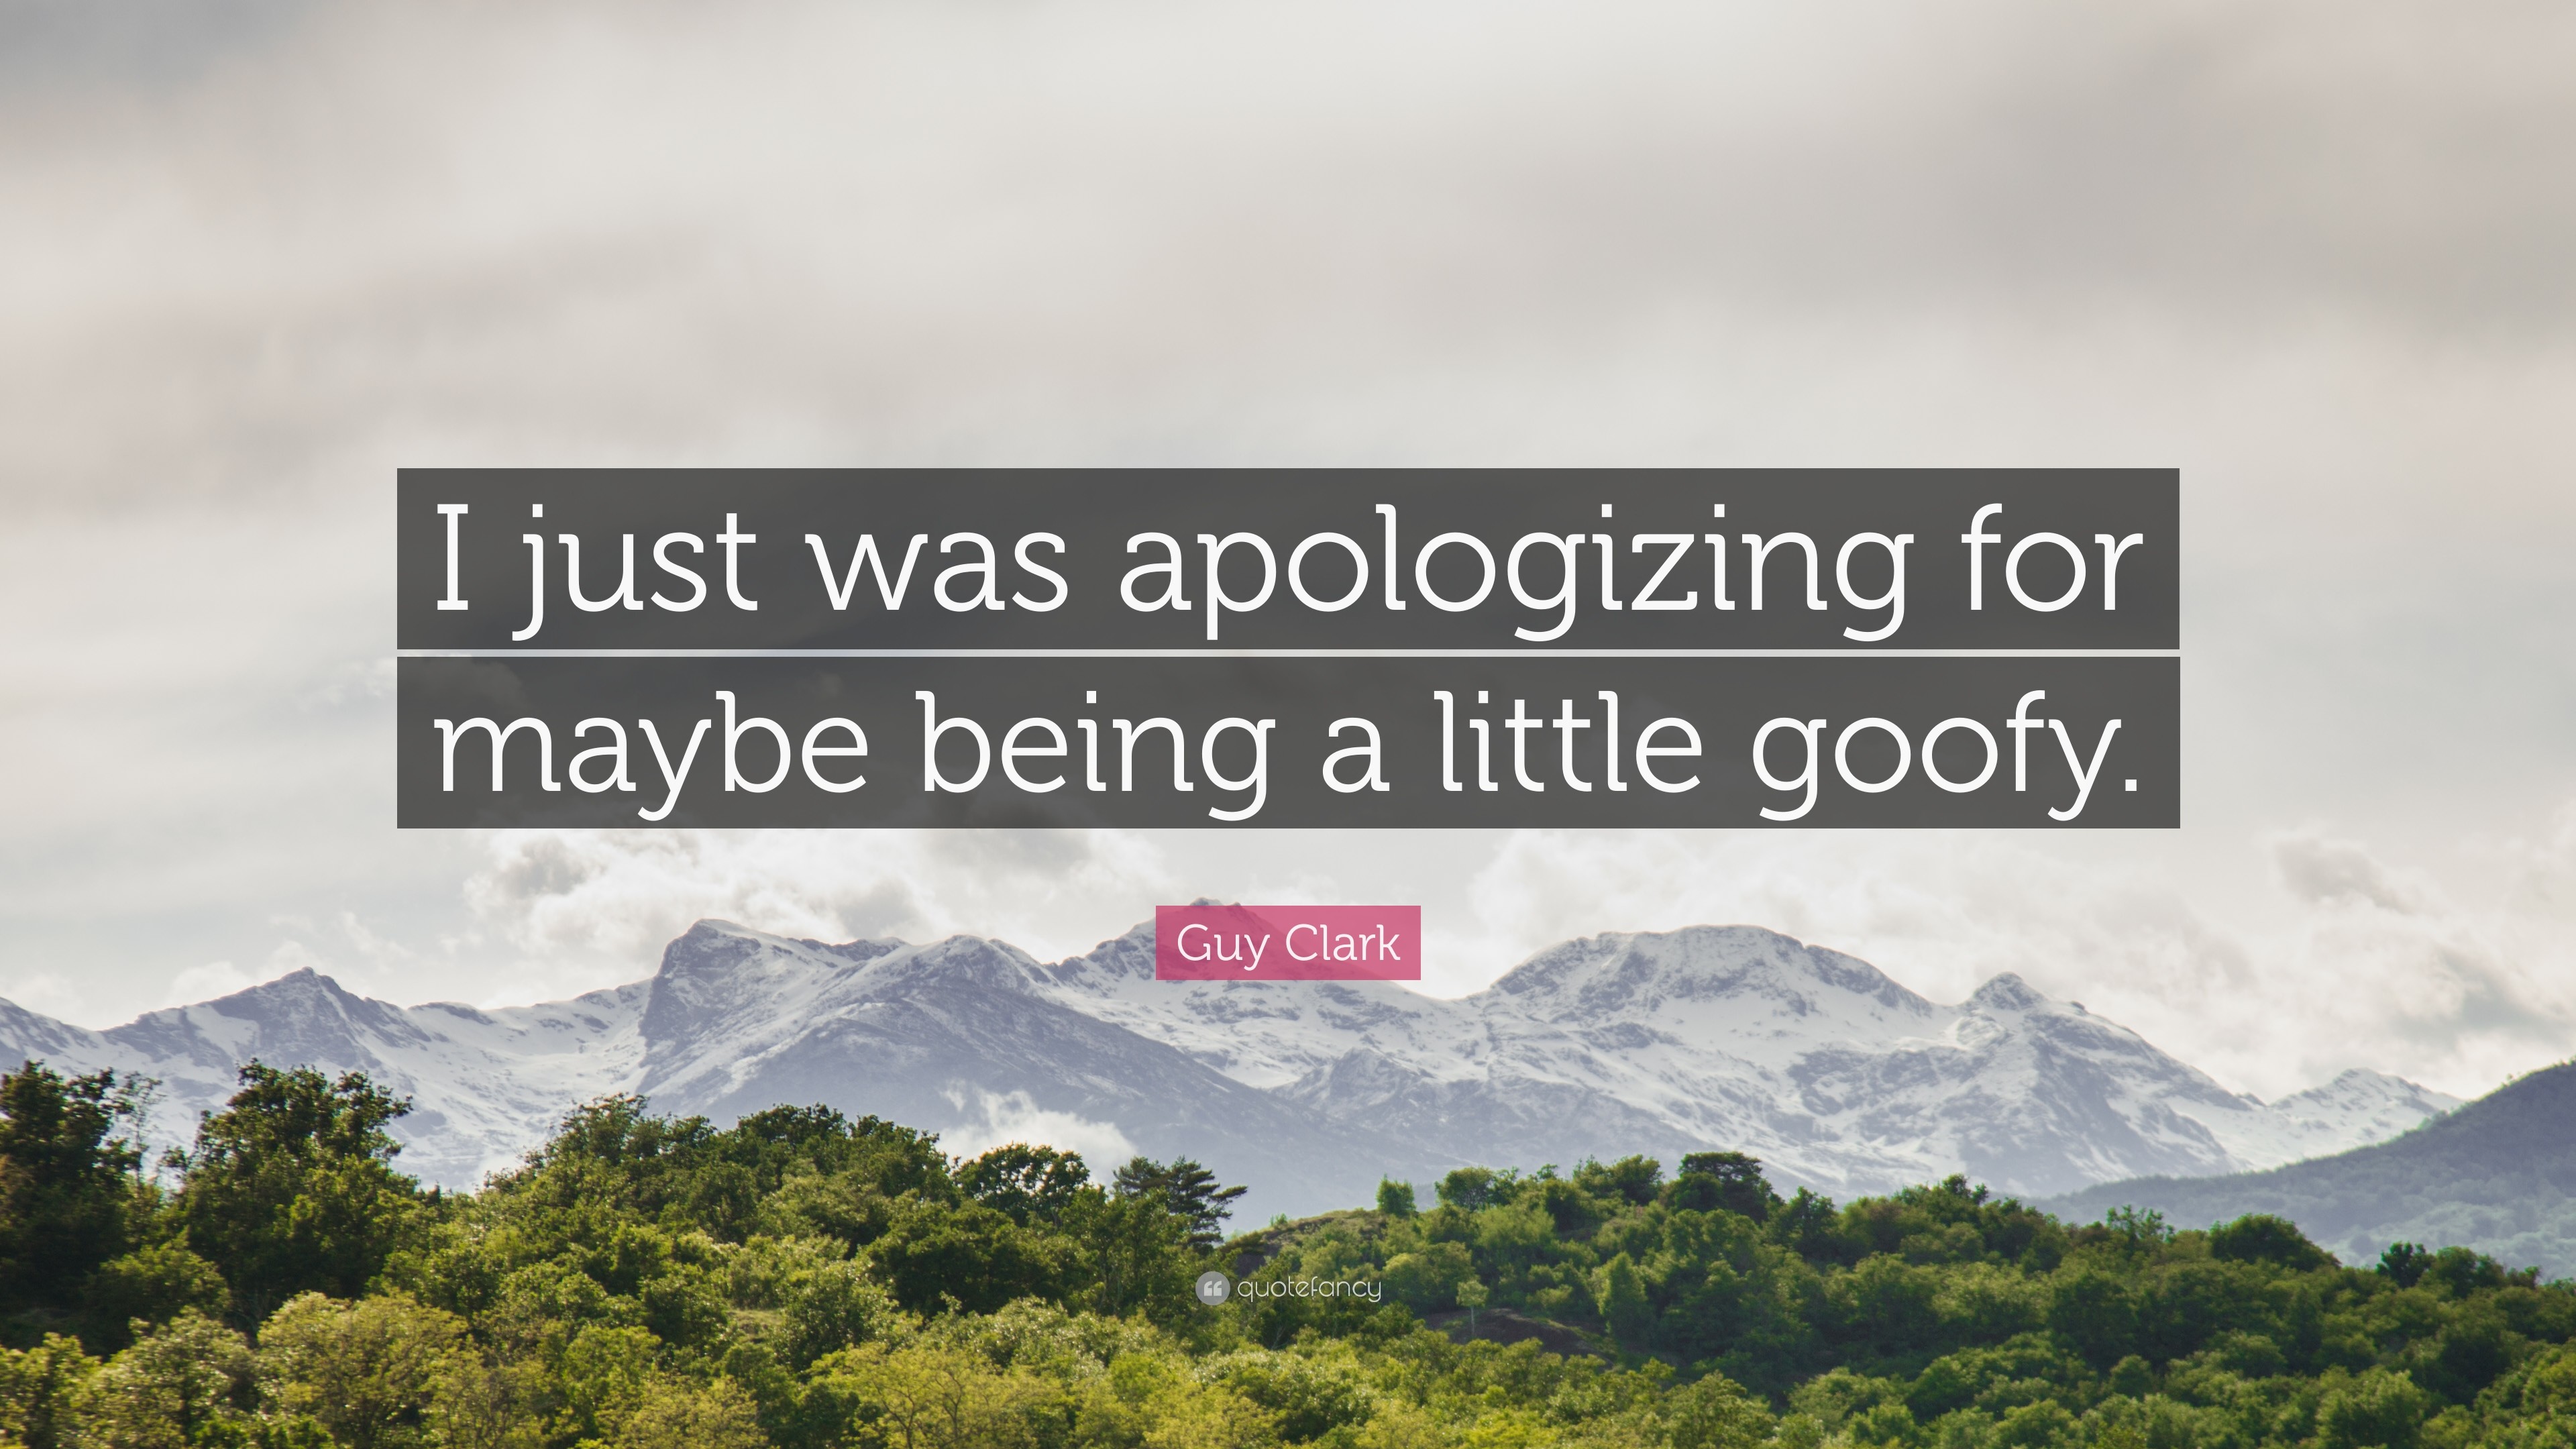 3840x2160 Guy Clark Quote: “I just was apologizing for maybe being a little goofy.